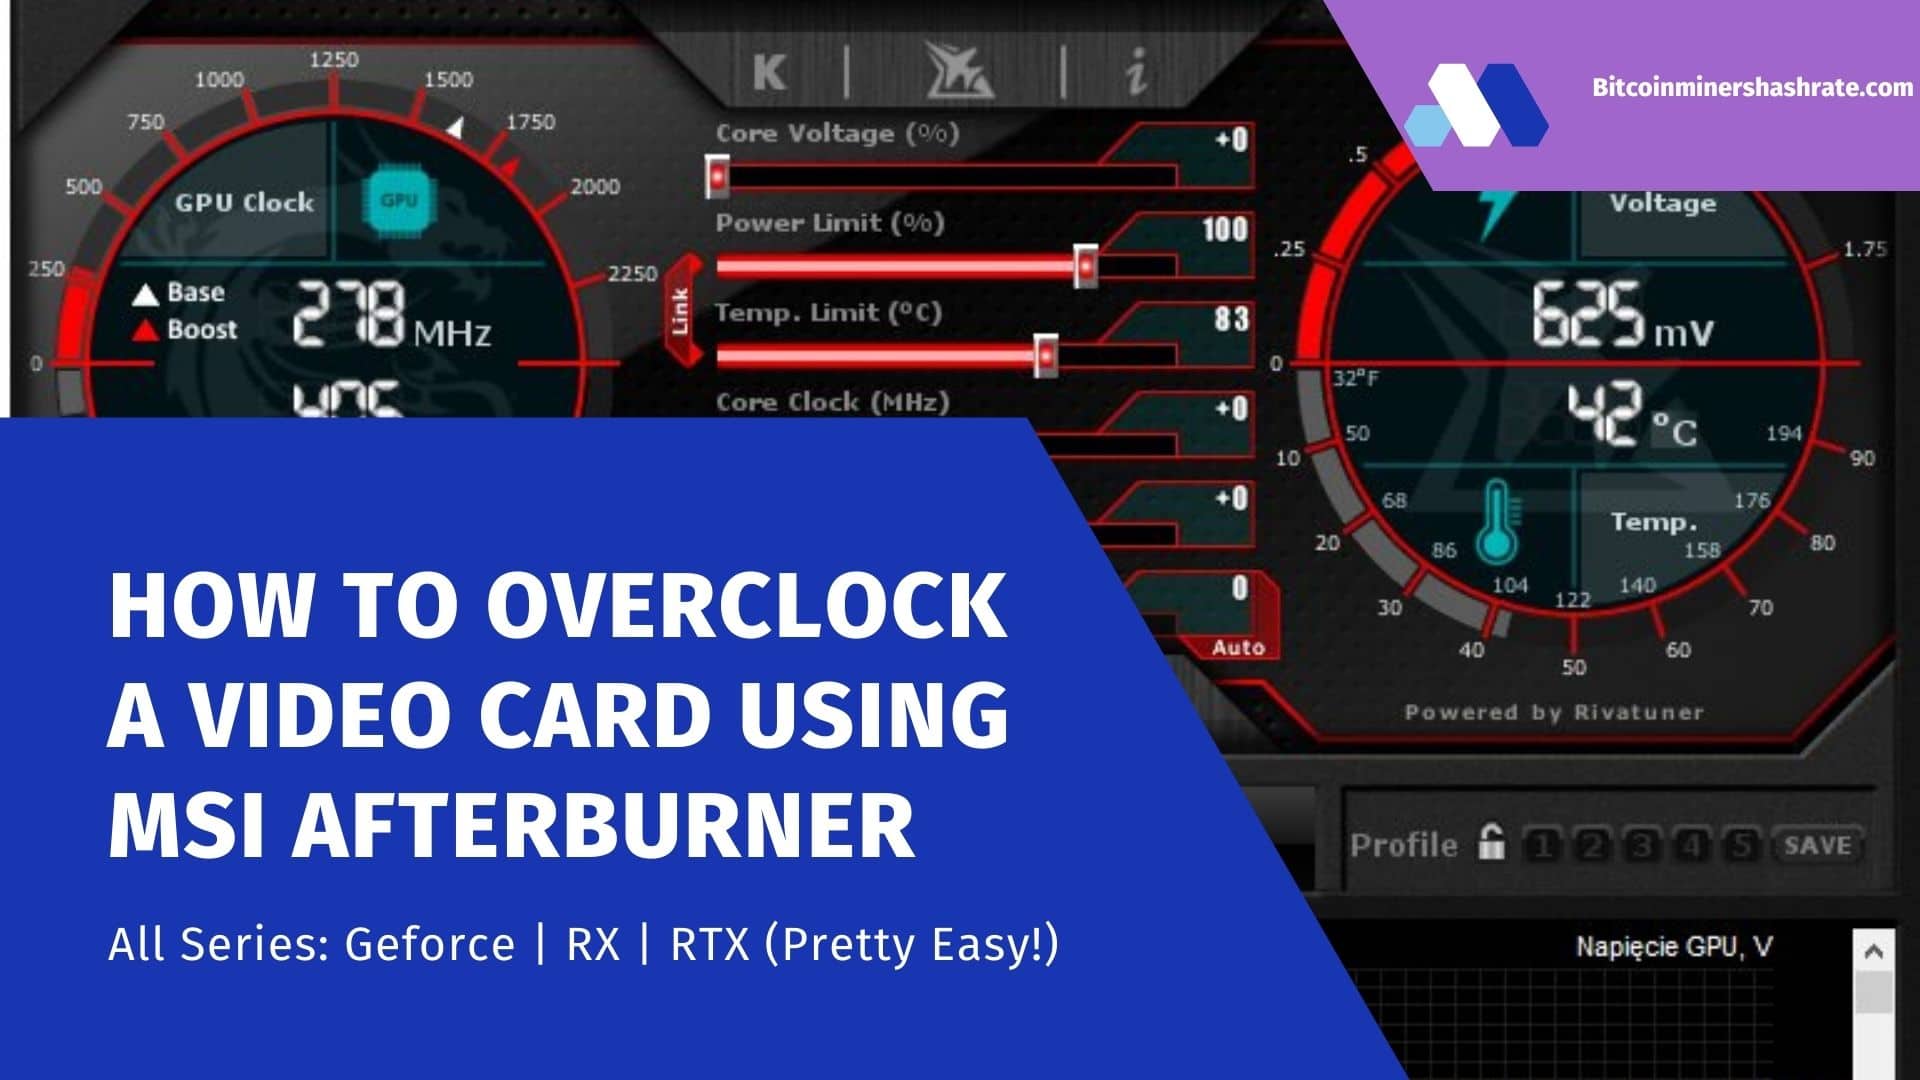 How to overclock a video card using MSI Afterburner